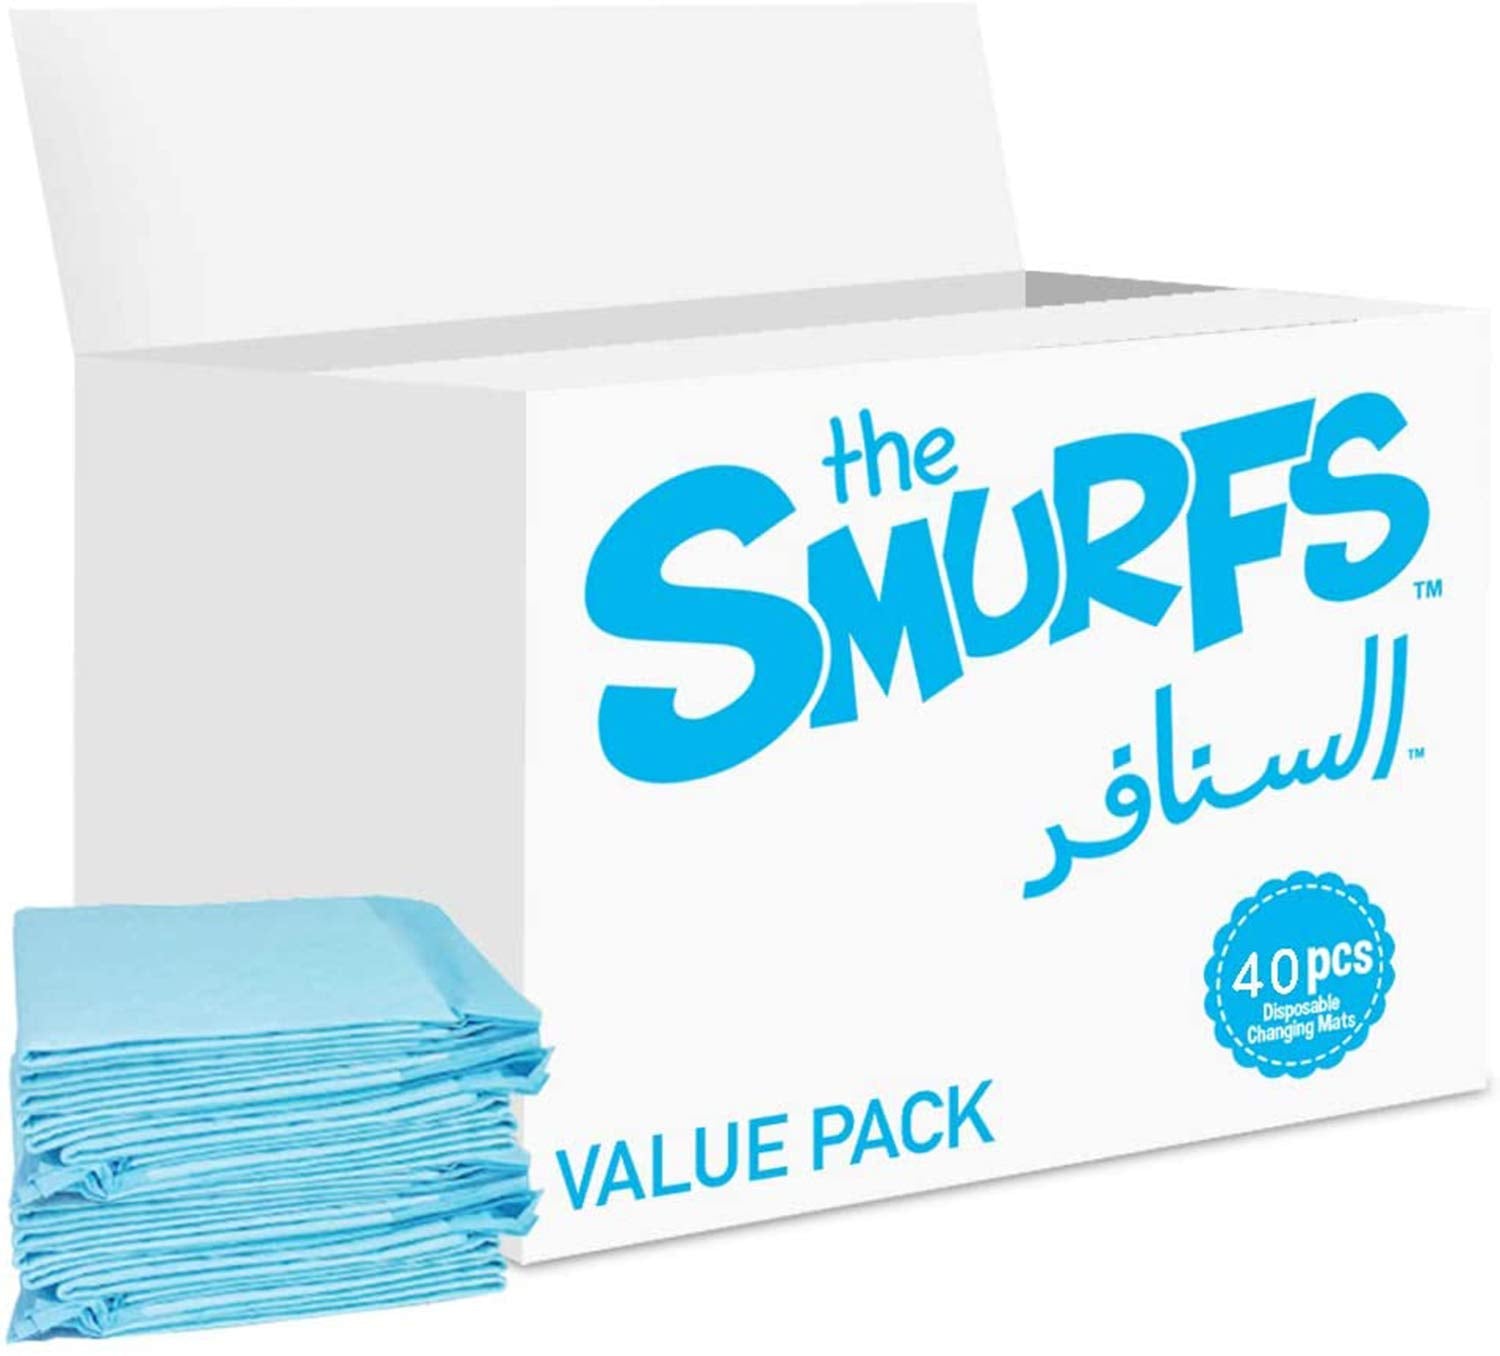 Smurfs Disposable Changing Mats Value Pack 40 Pcs, Nappy Pad, Pet Training Baby Diaper Mat, Pad Blue